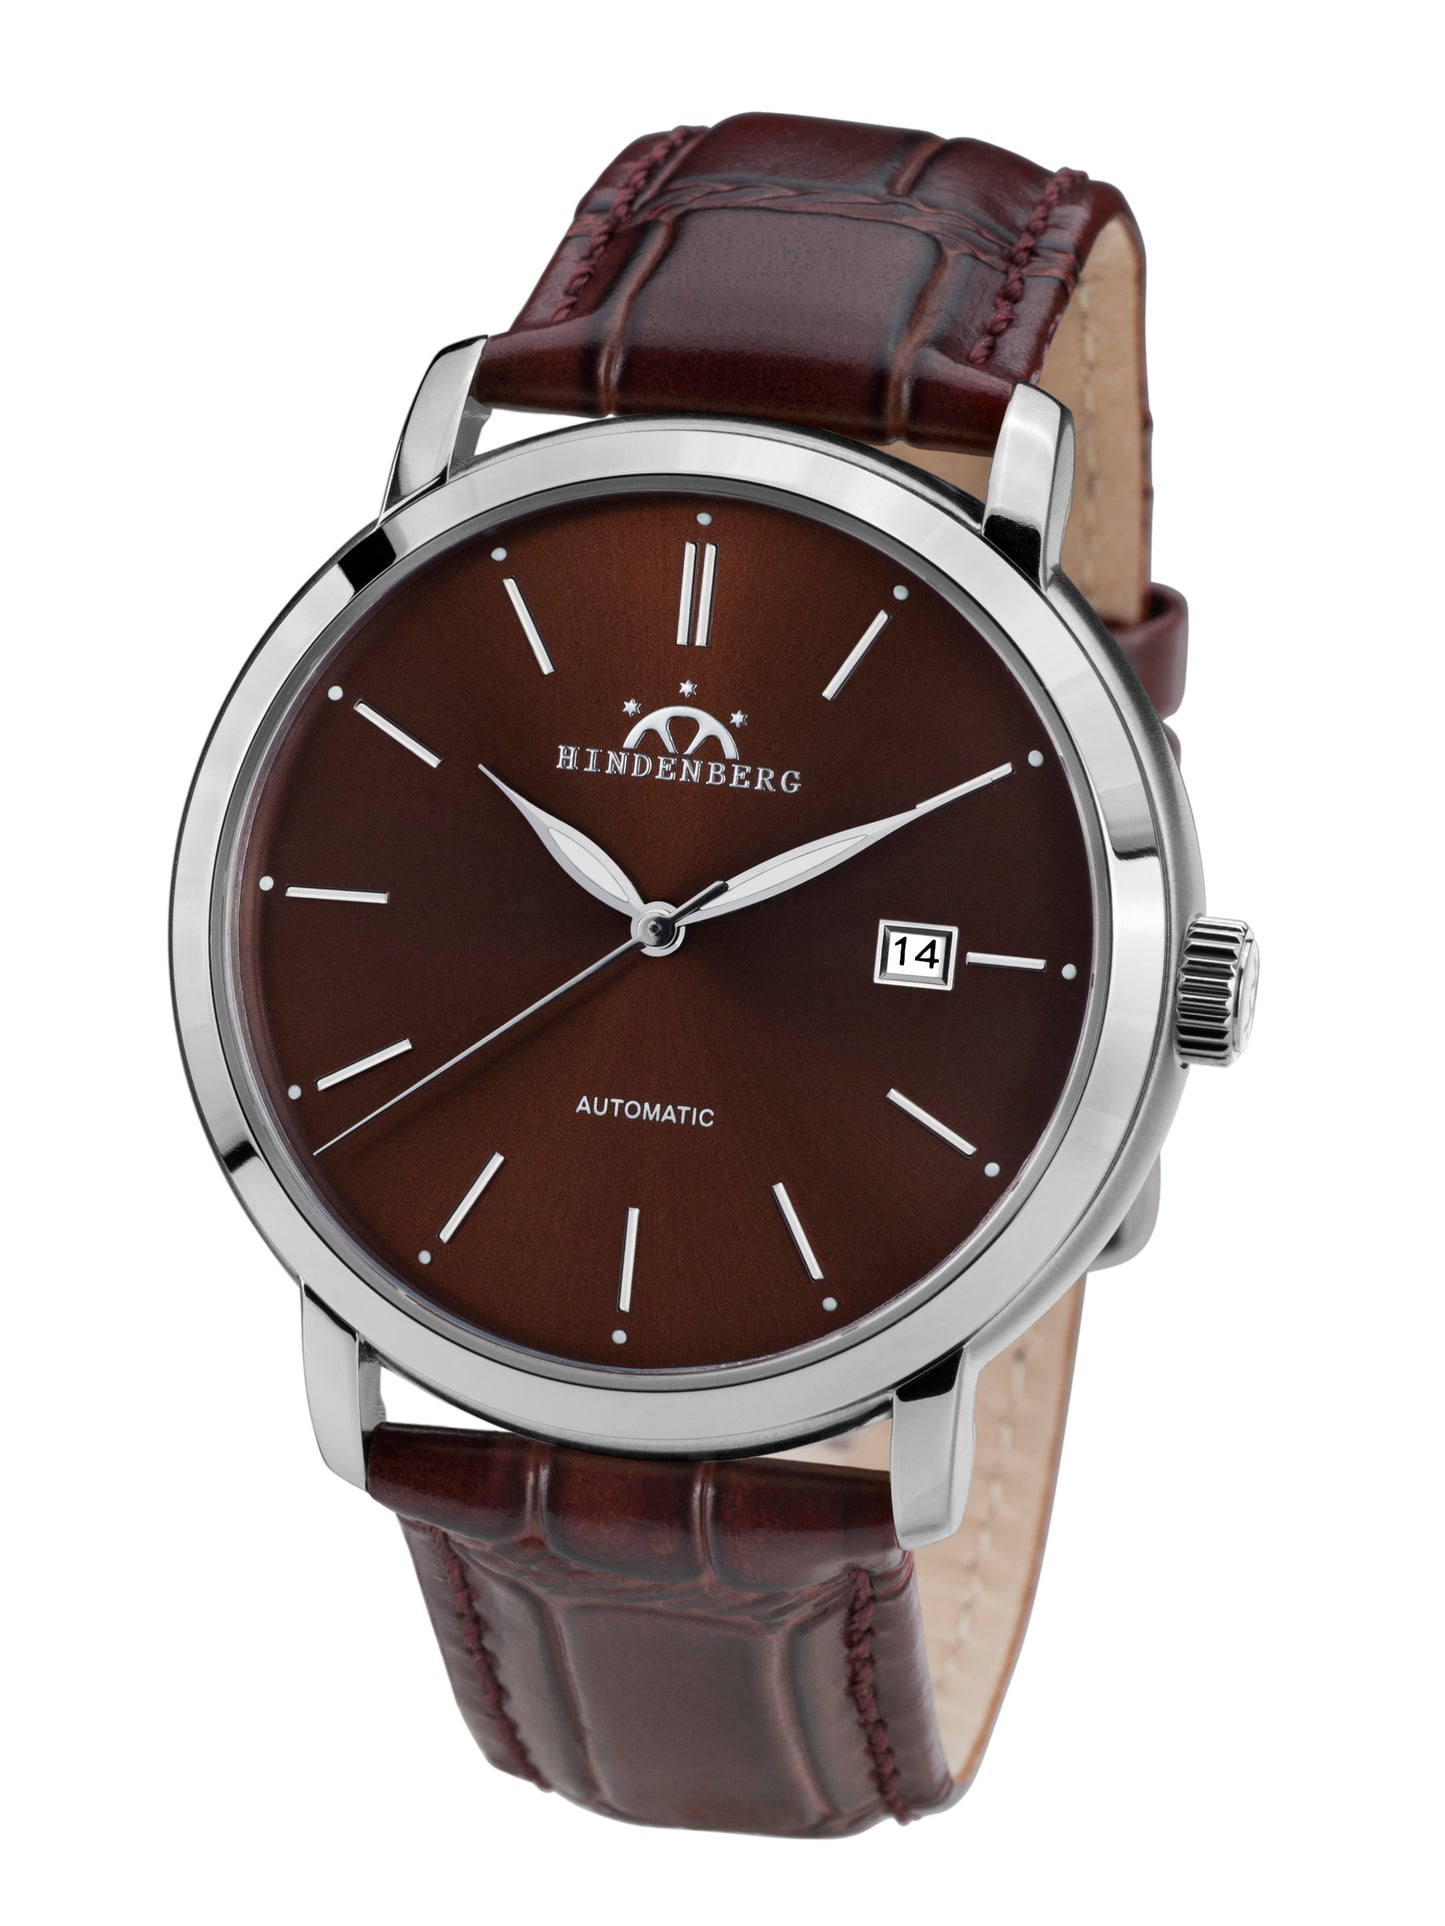 Automatic watches — Ascender — Hindenberg — steel brown